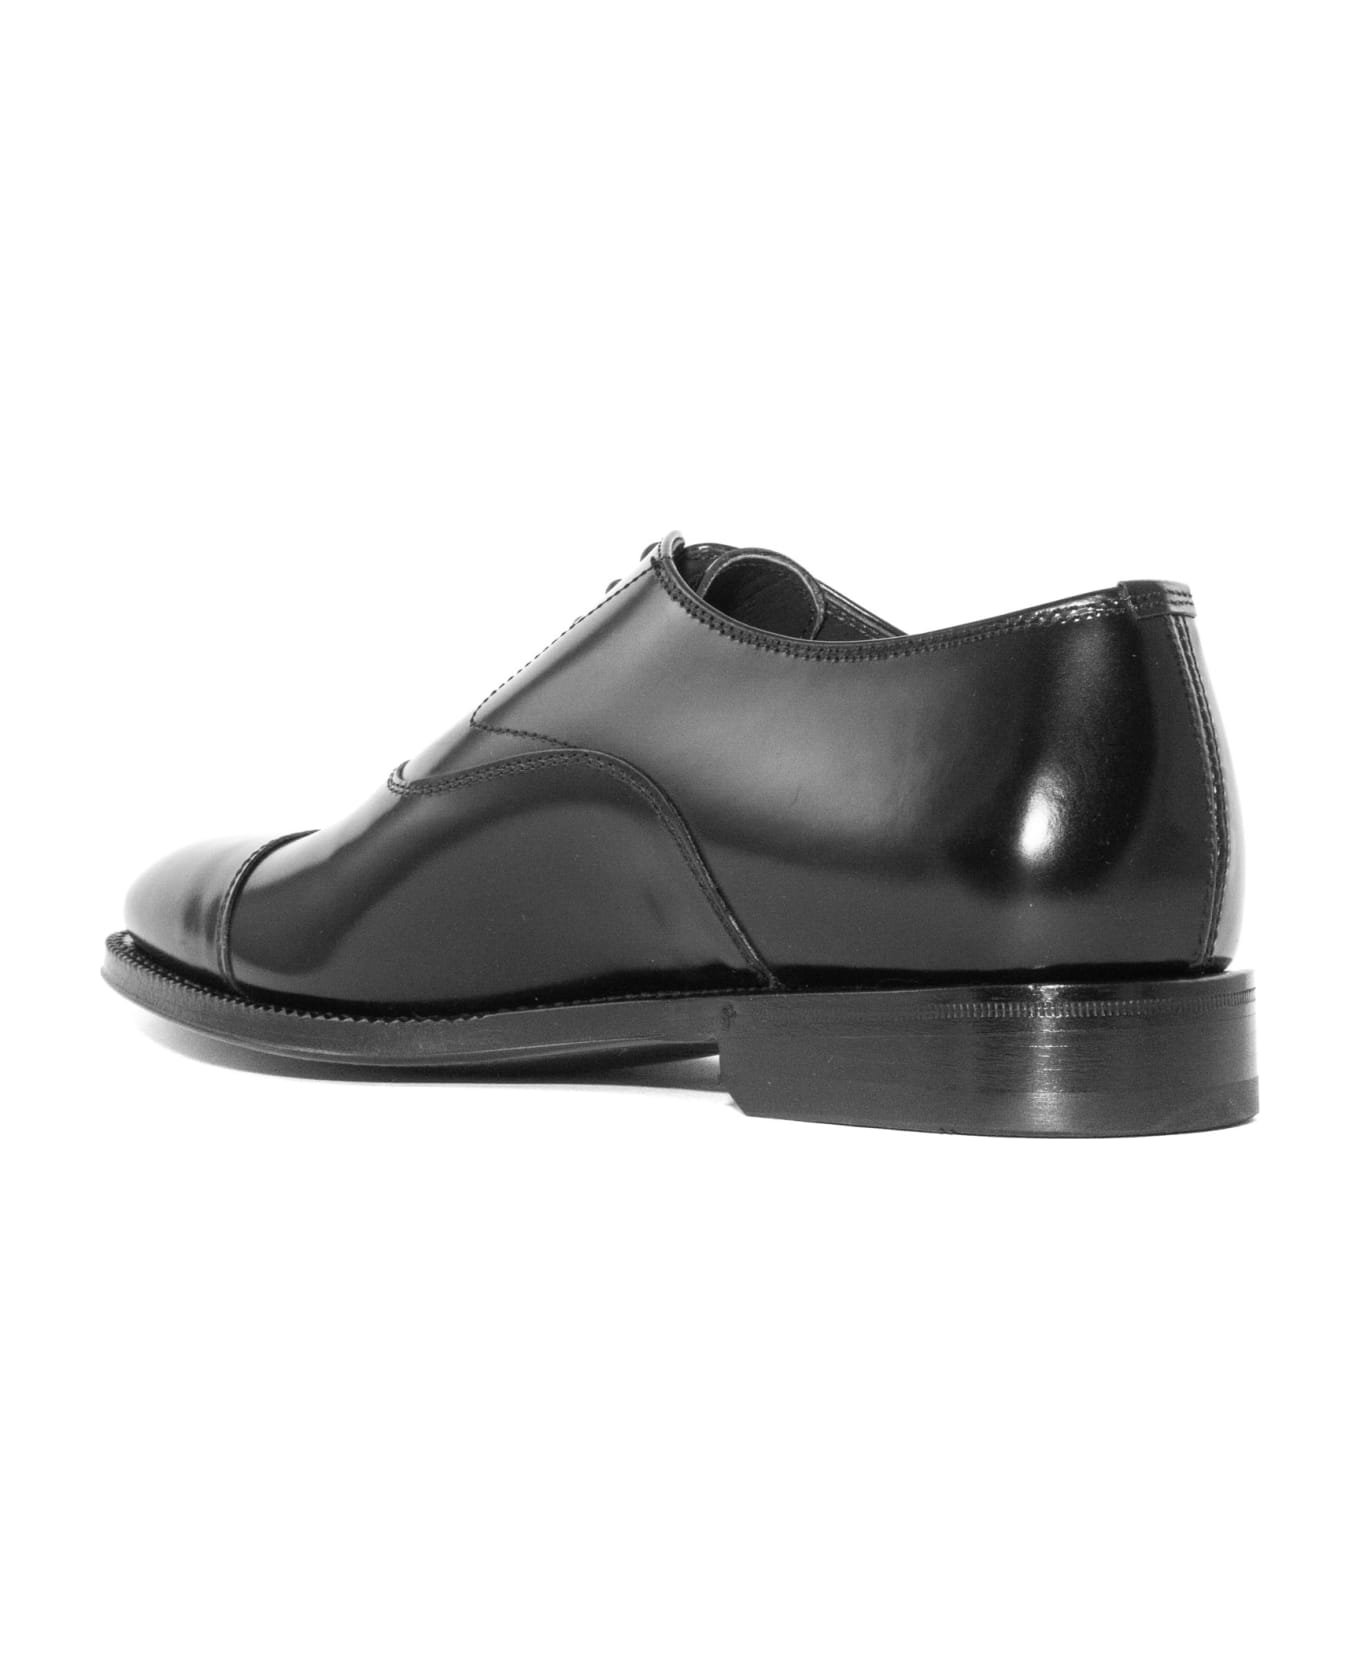 Green George Black Brushed Leather Oxford Shoes - Black